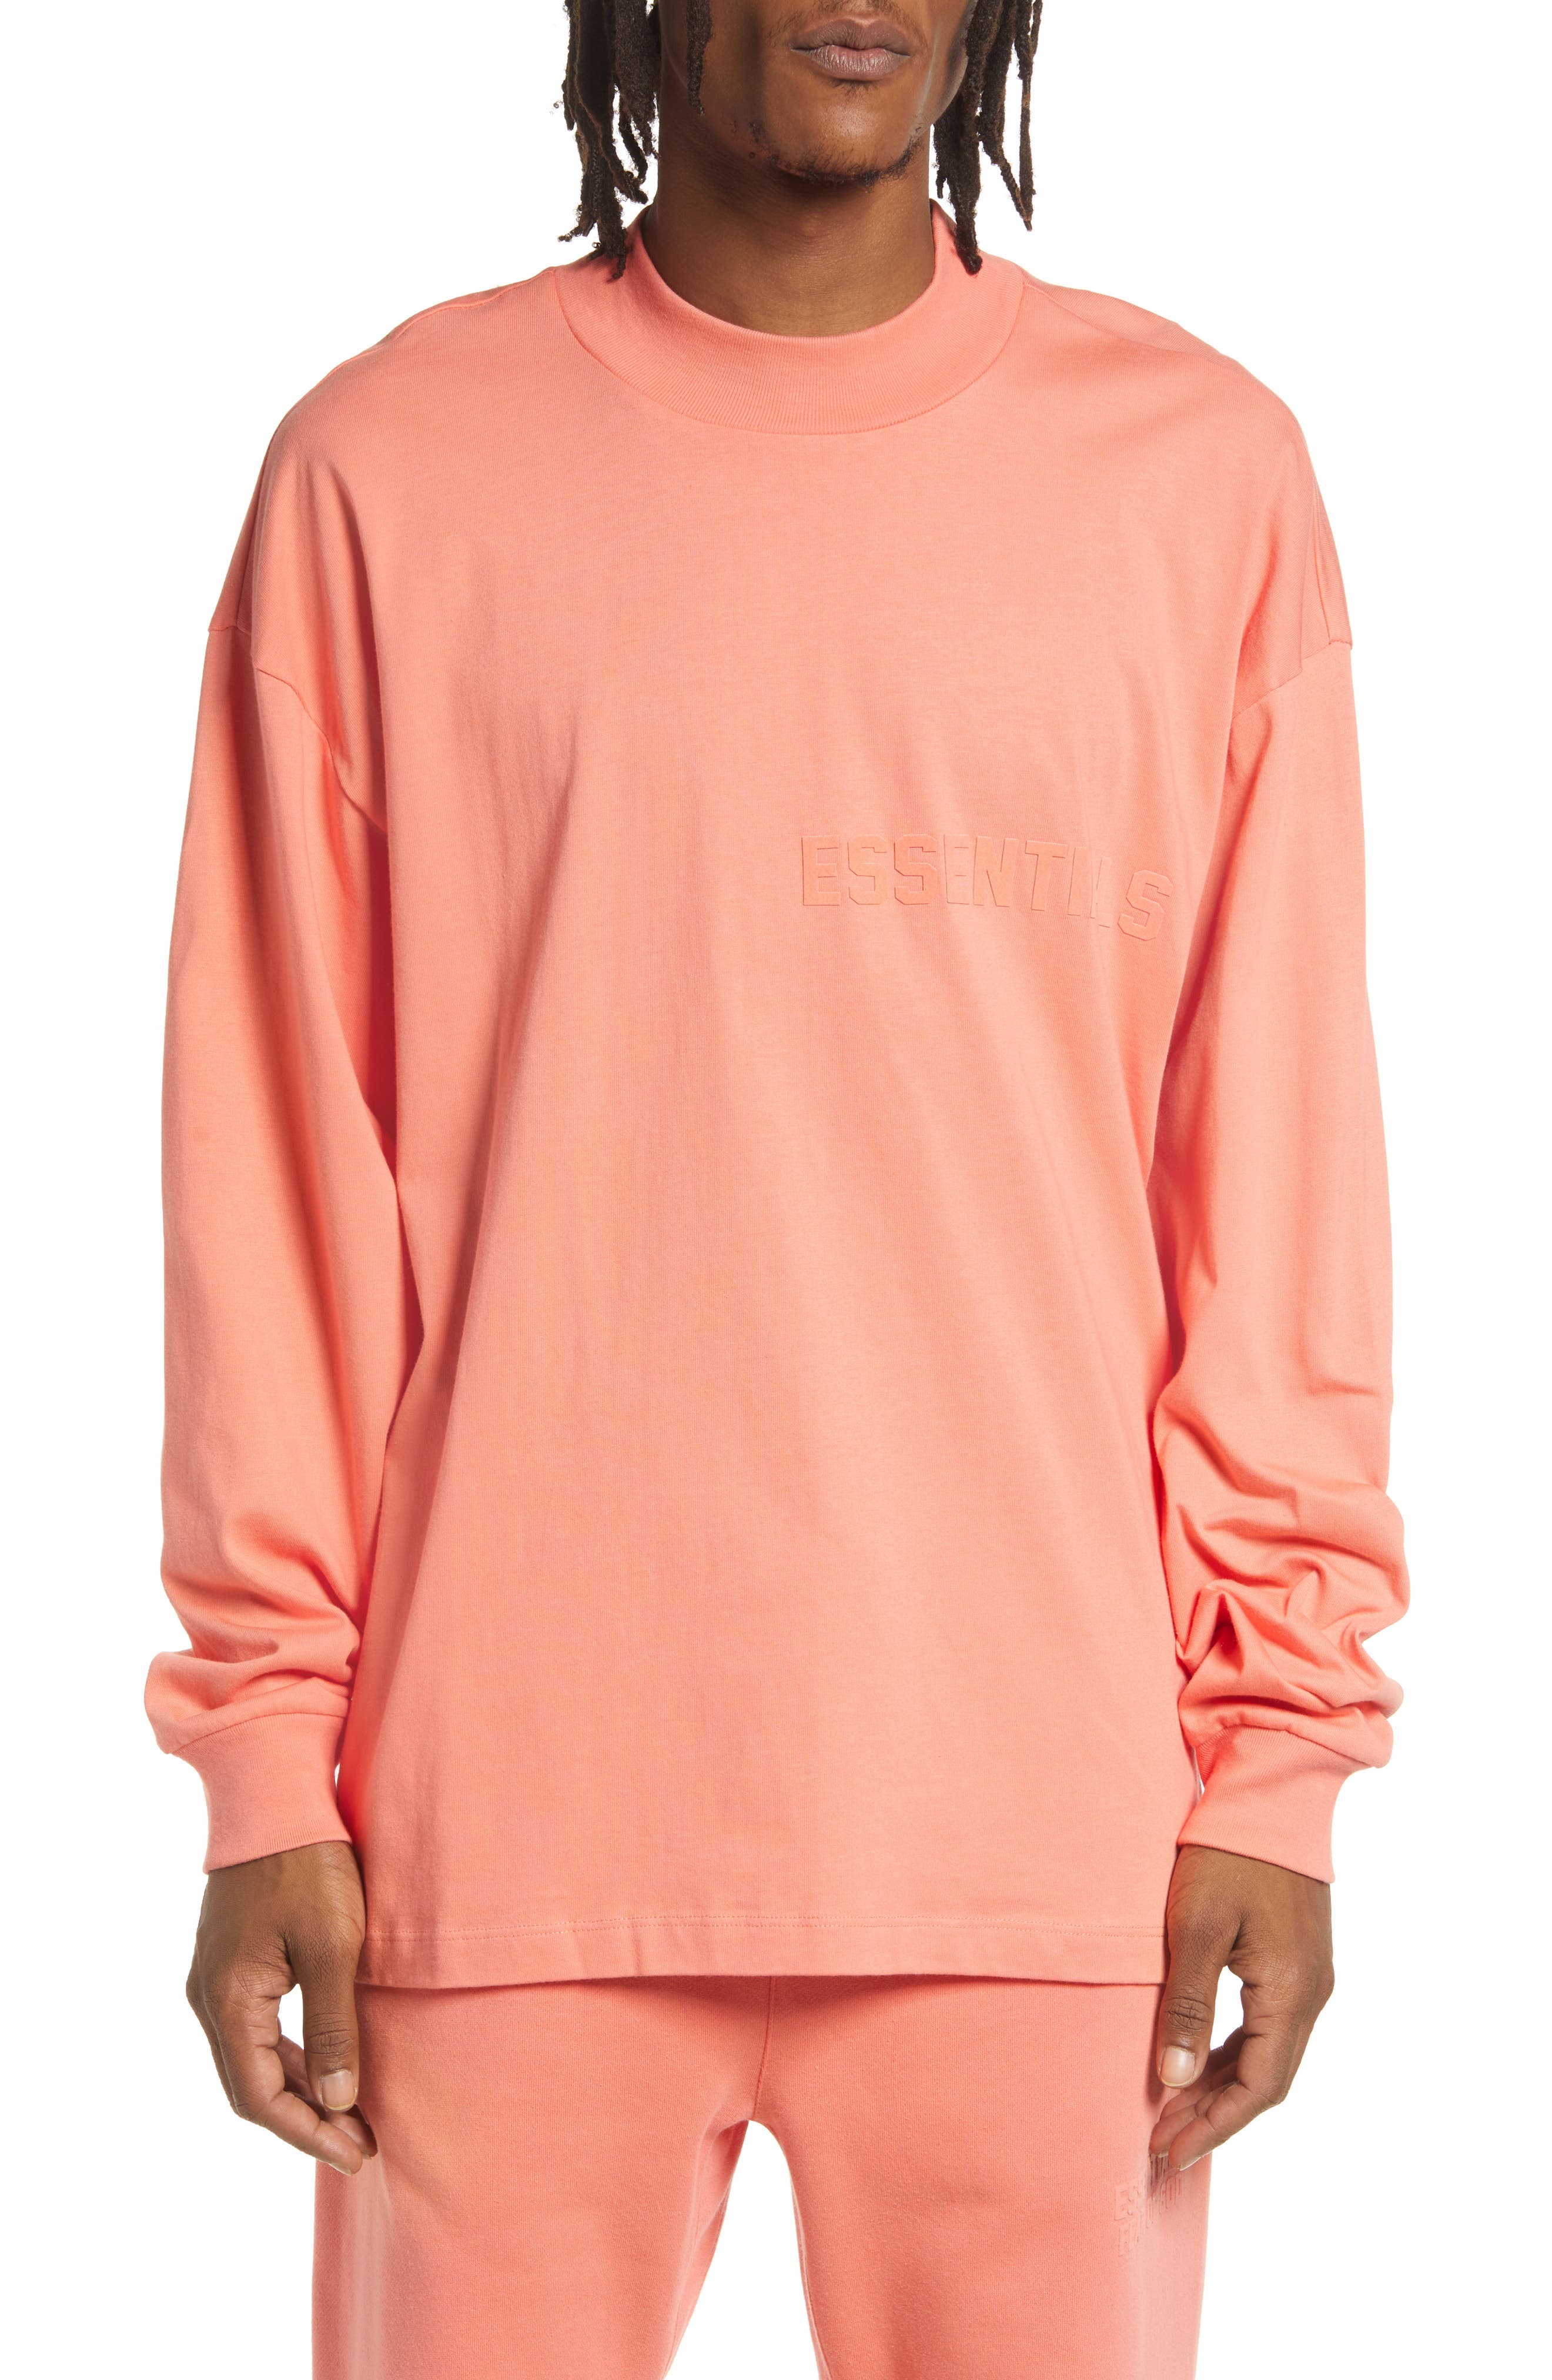 for Men Rich Cotton T-shirt in Coral Pink Mens Clothing T-shirts Short sleeve t-shirts 